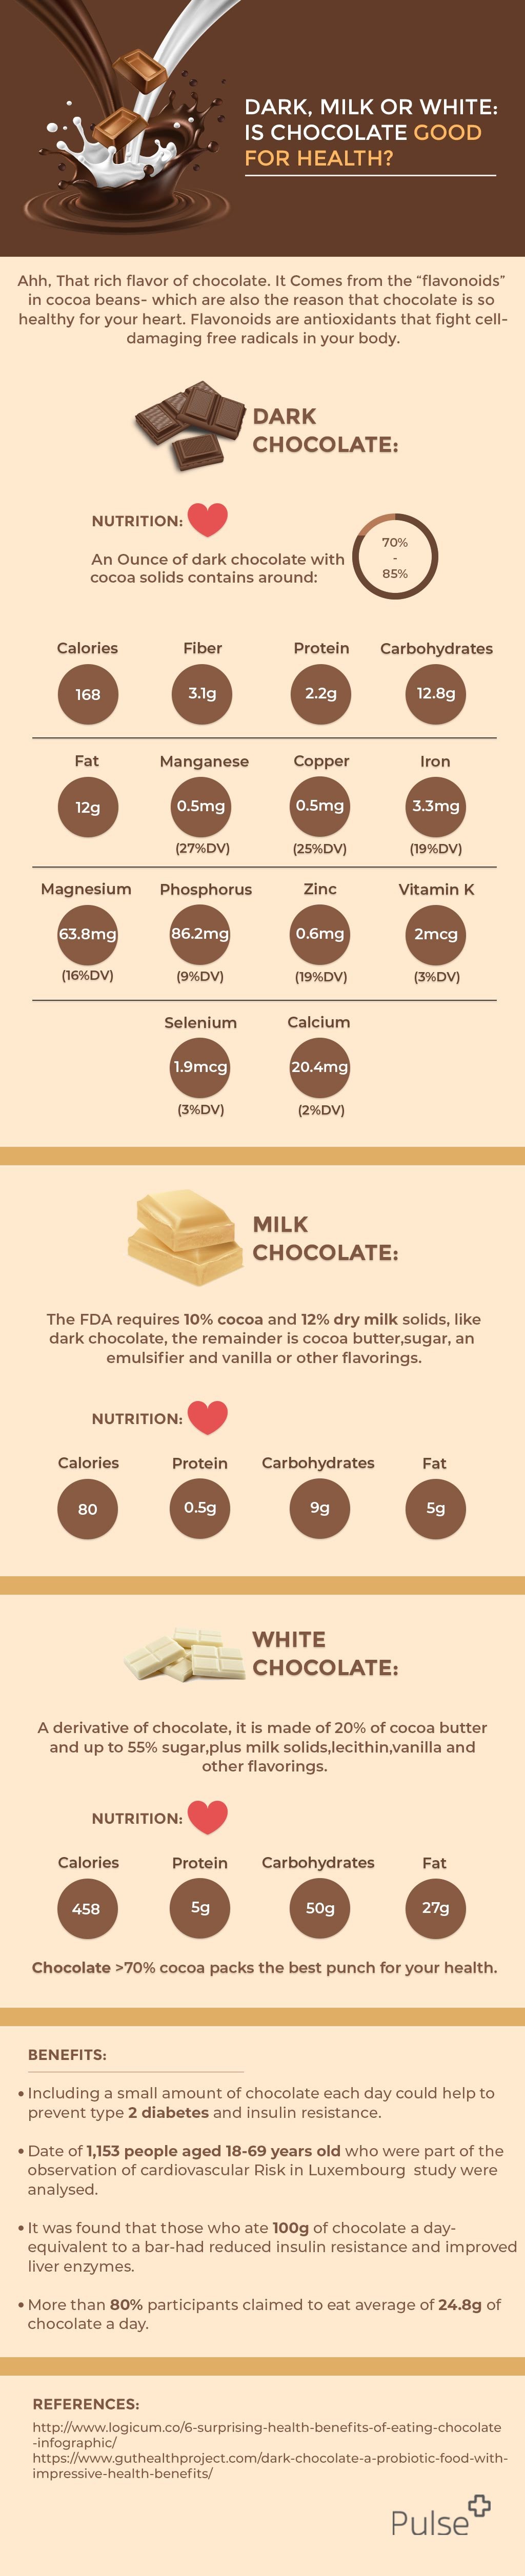 Dark, Milk or White: Is Chocolate good for health? #infographic